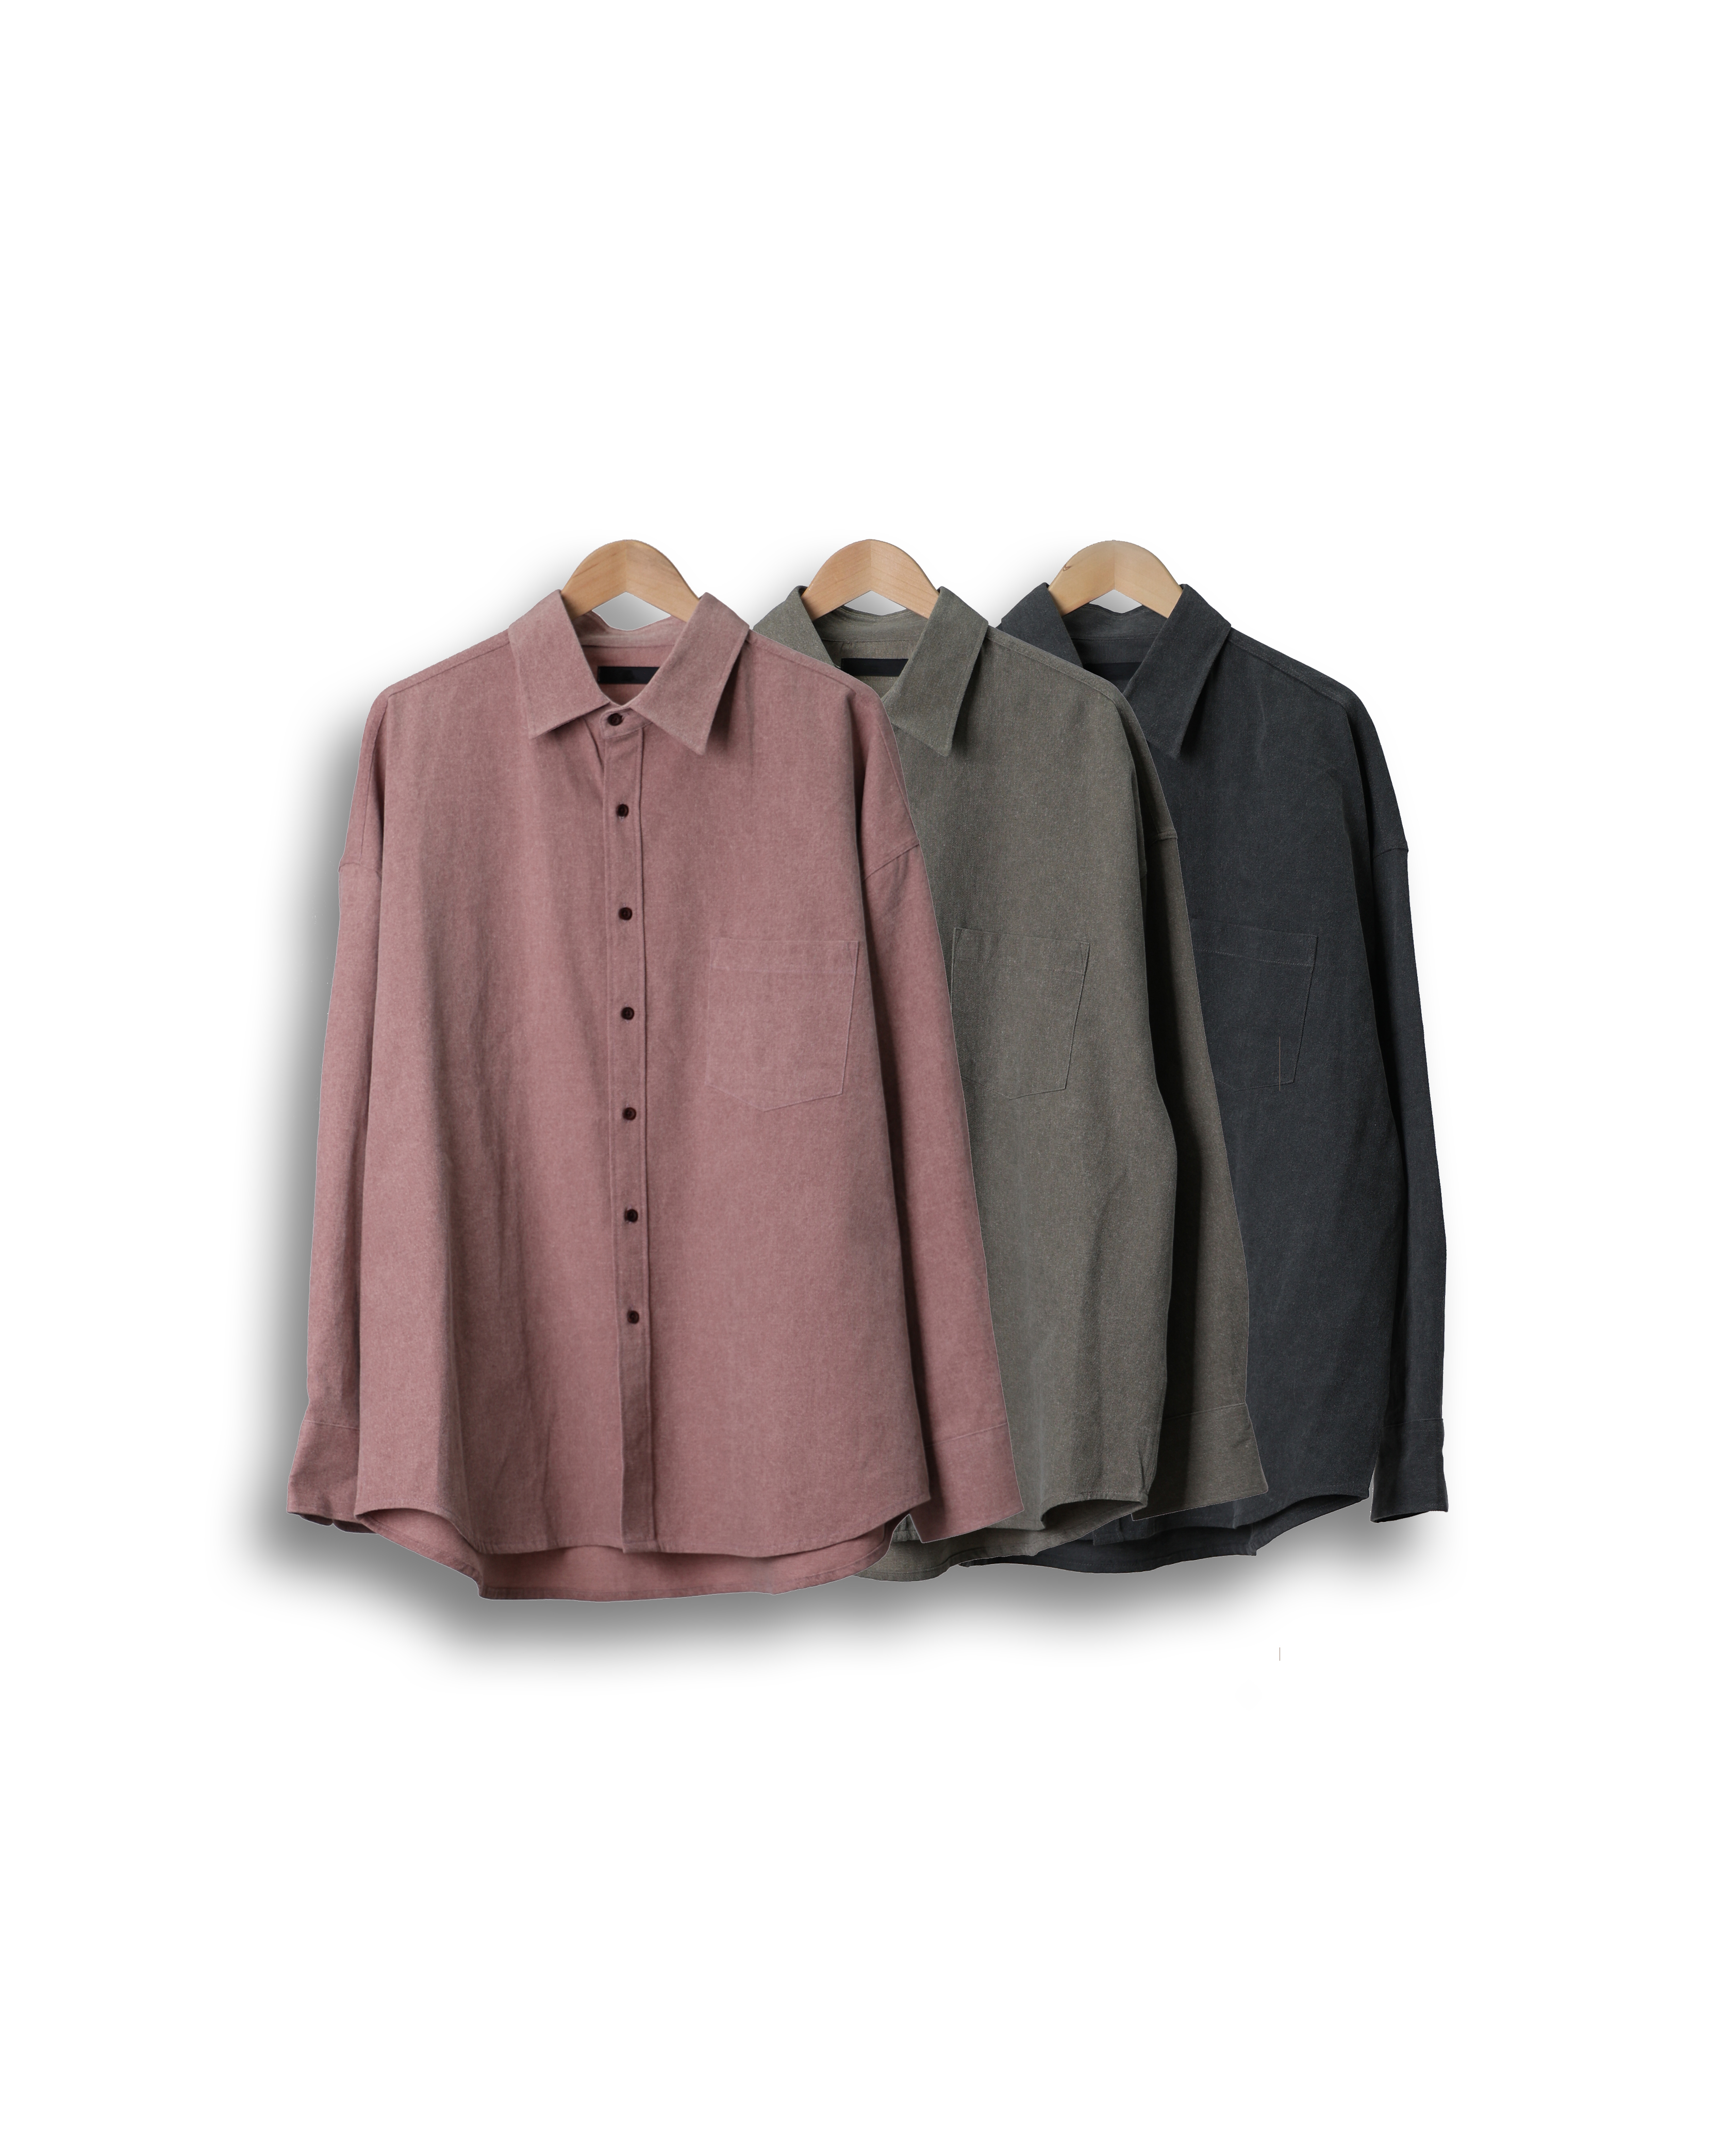 OTHER 362 Pigment Easy Over Shirts (Charcoal/Khaki Brown/Pink)